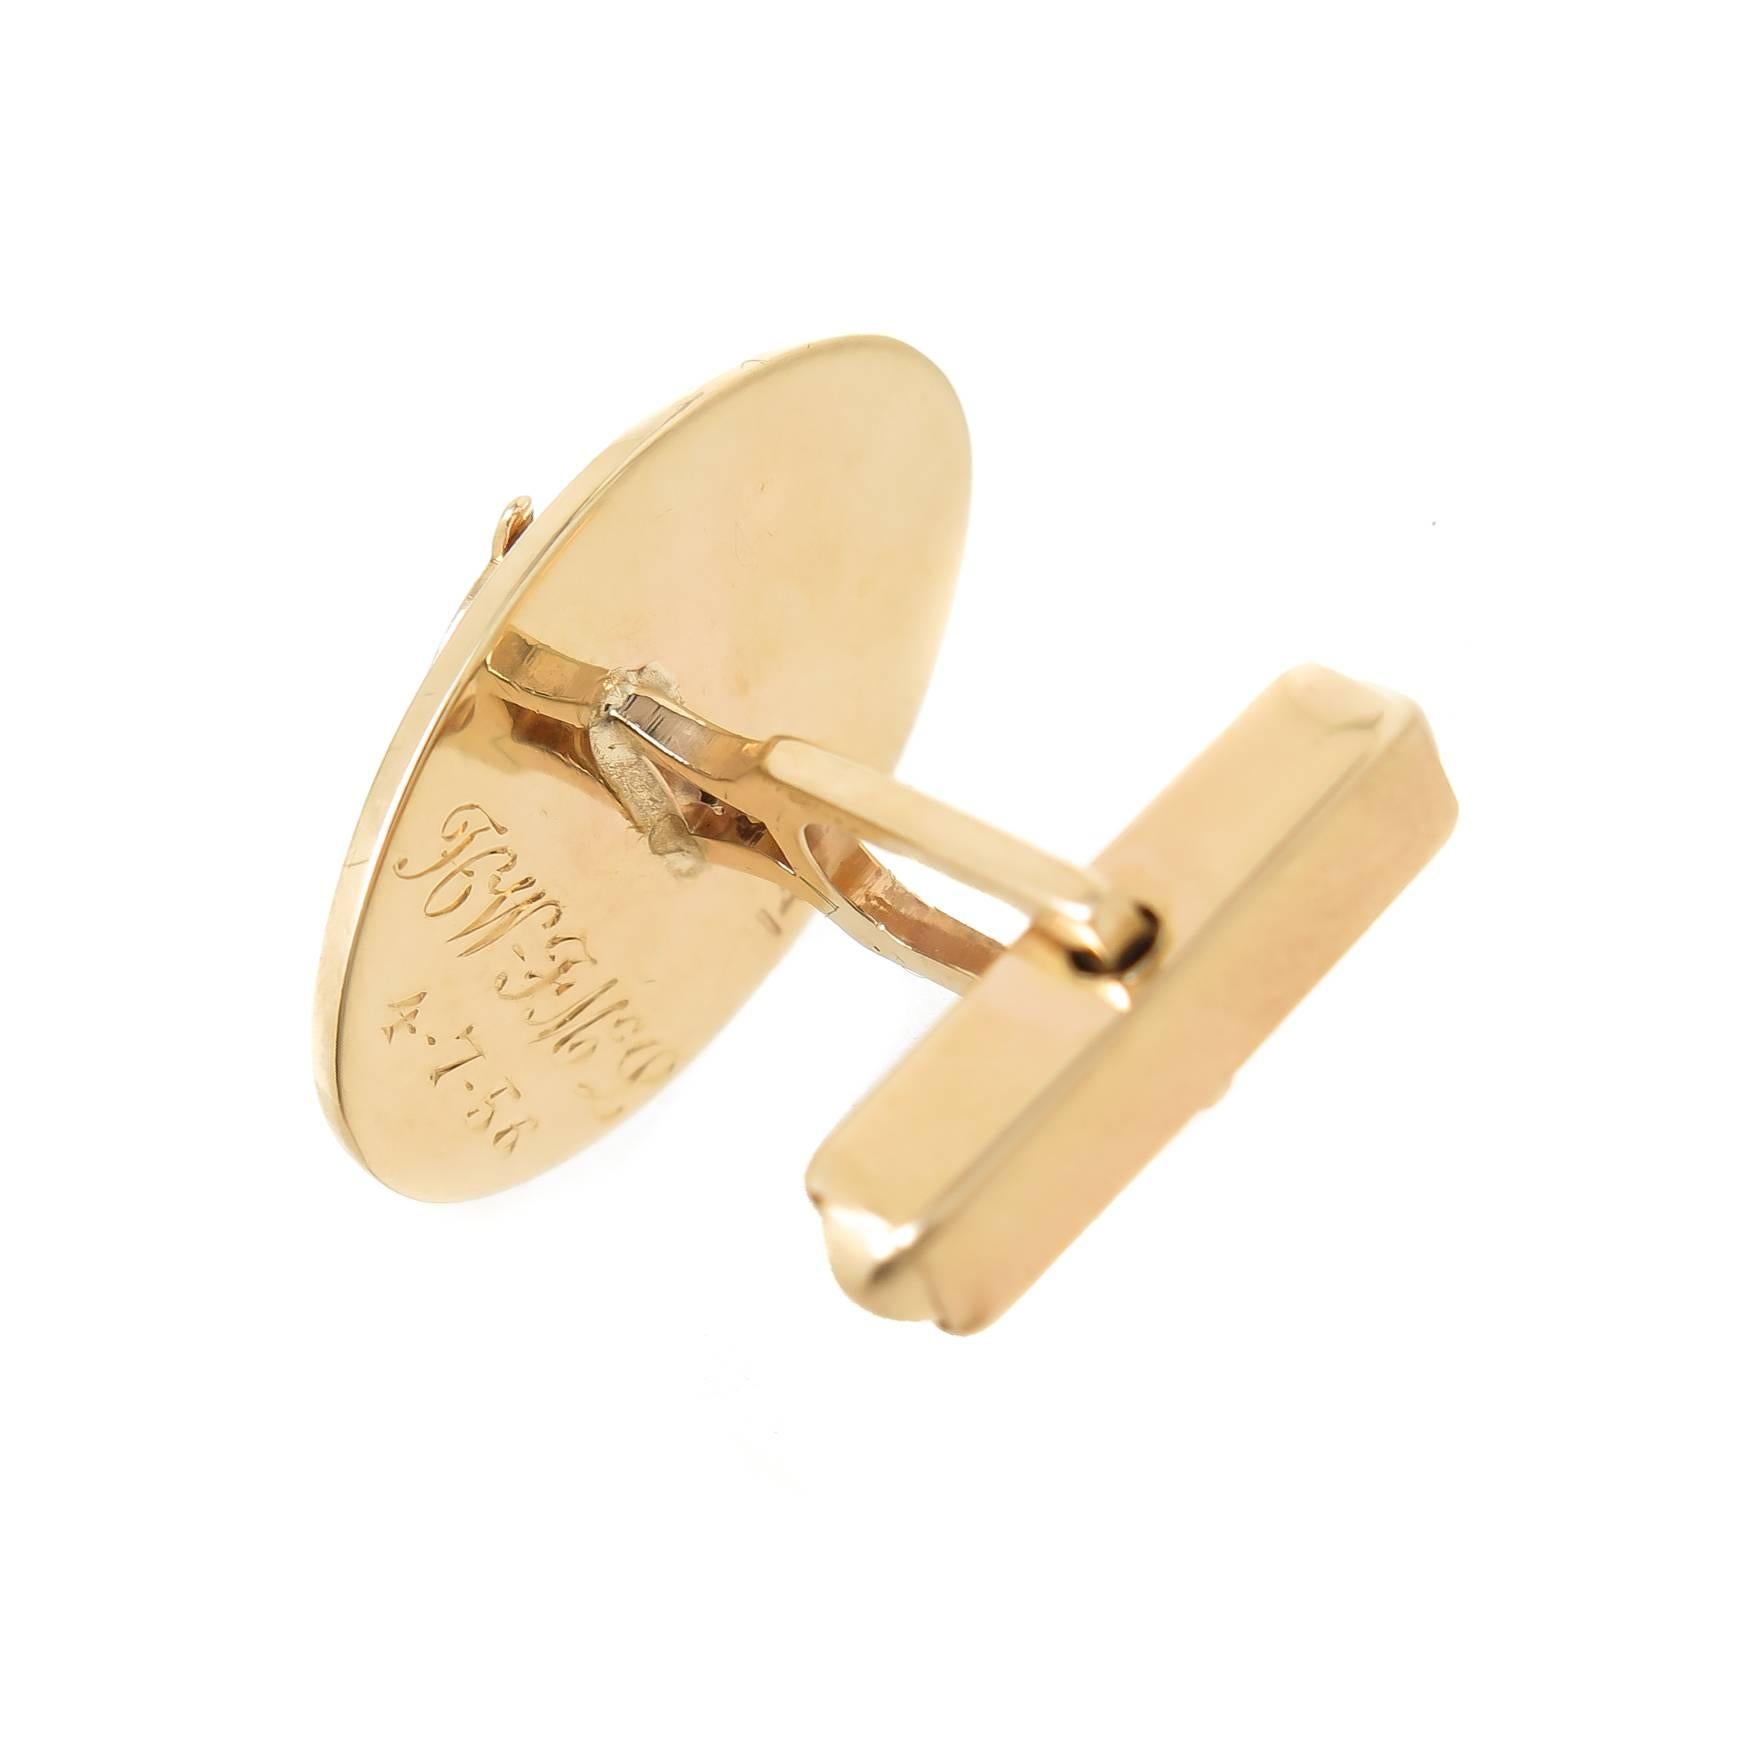 Circa 1950s Very Cool 14K yellow Gold Telephone Cuff-links, with a detailed and movable Phone Dial that reads: 